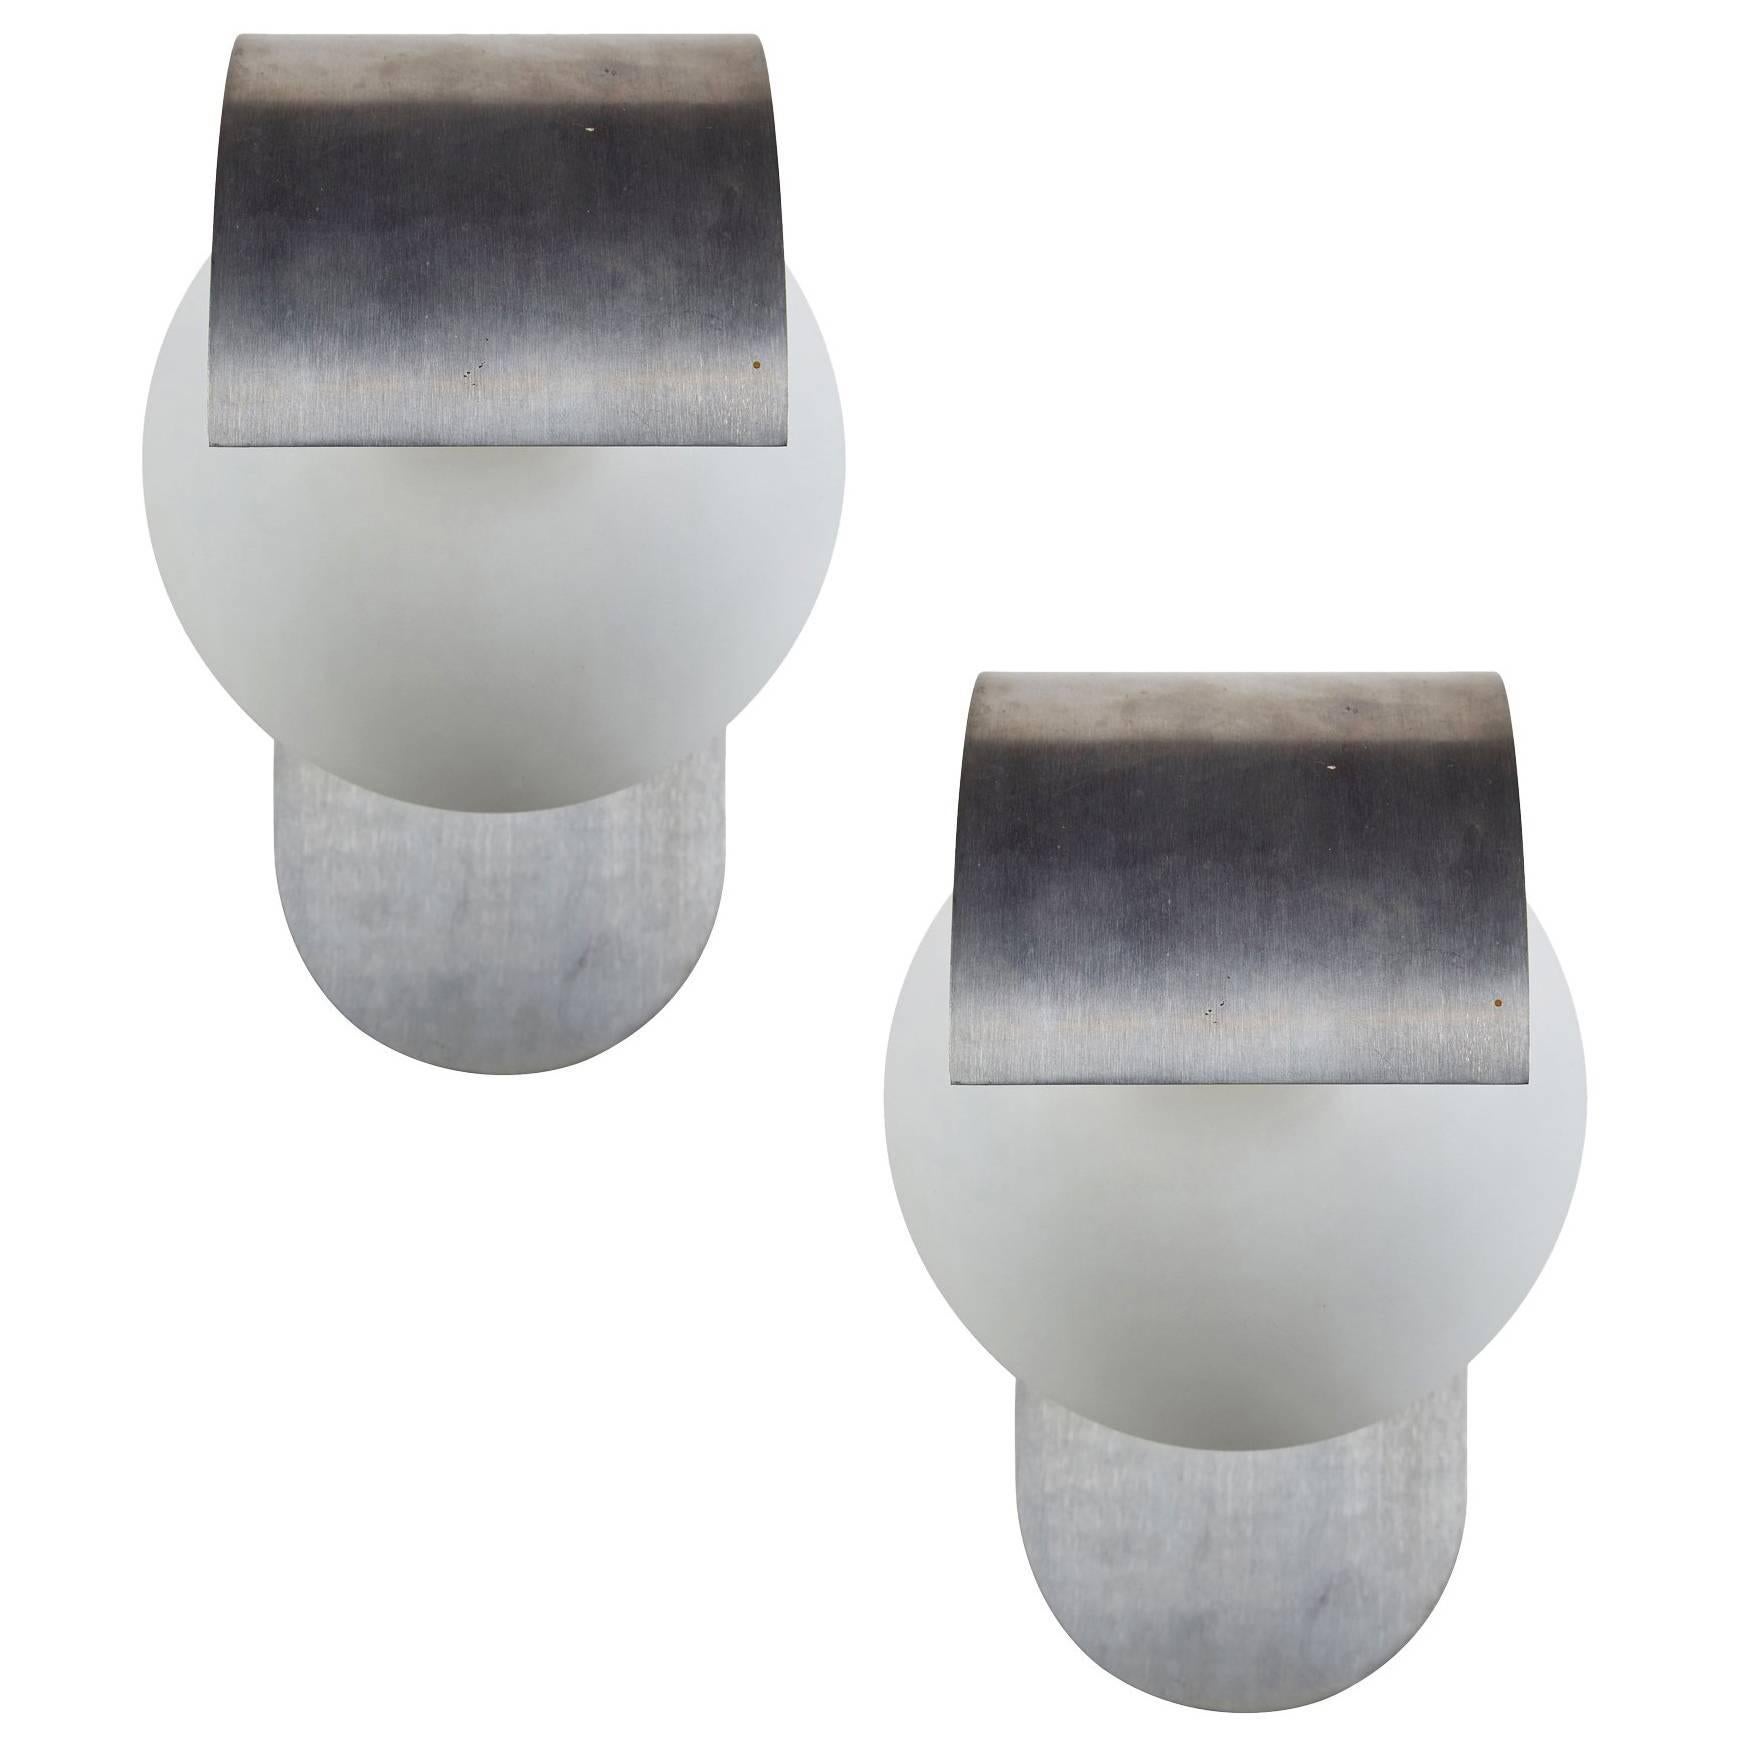 Pair of Brushed Aluminum and Satin Glass Sconces by Lumi